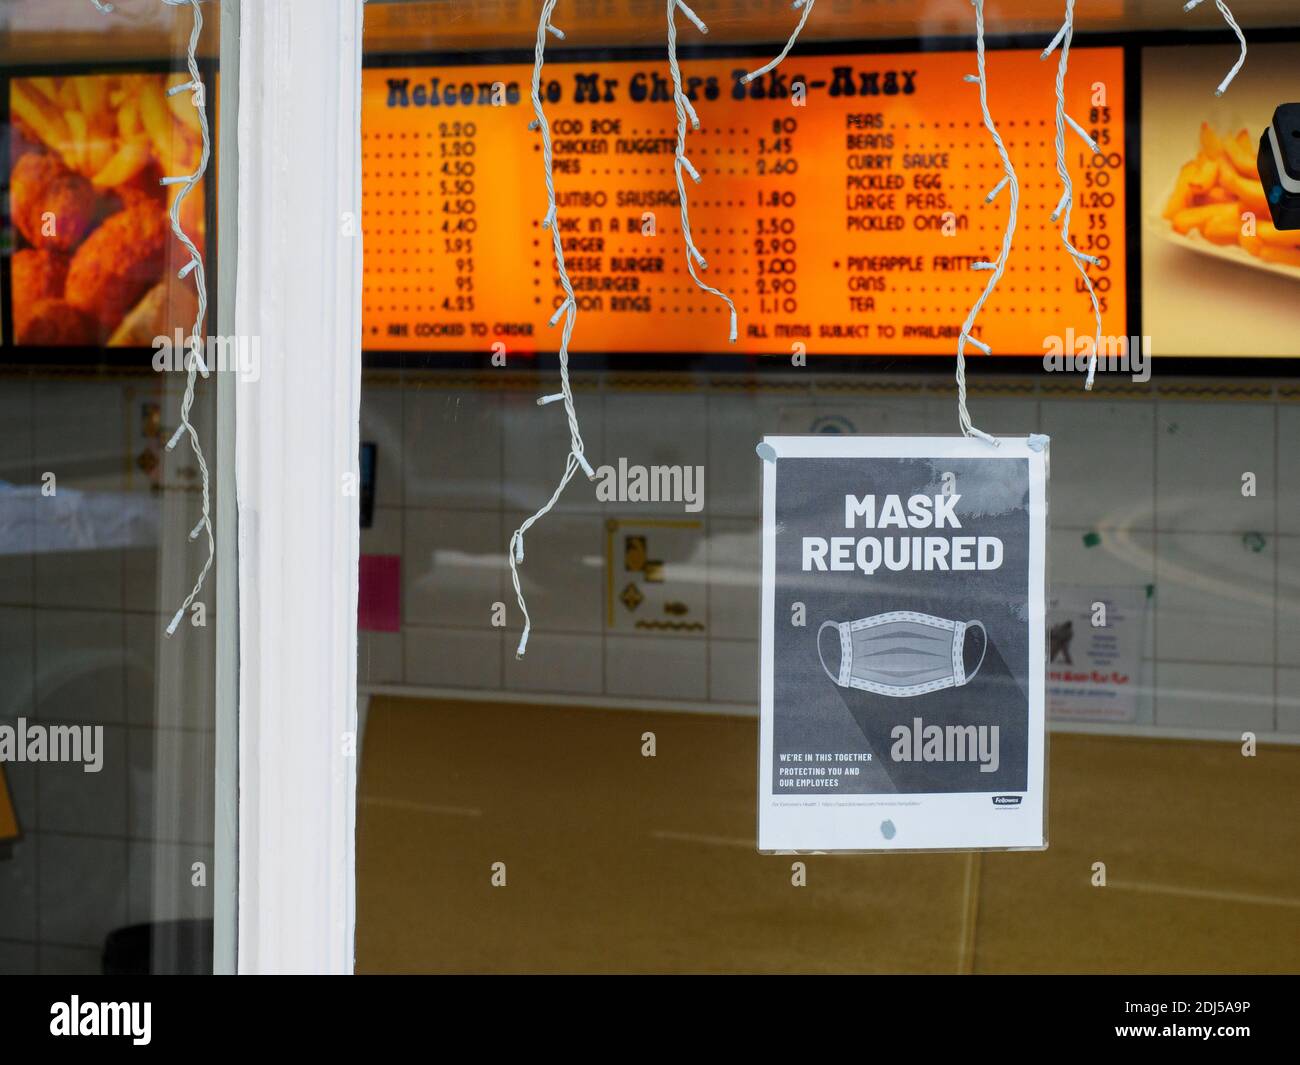 Mask Required sign on window of a fish and chip take-away shop, Bideford, Devon, UK, 2020 Stock Photo